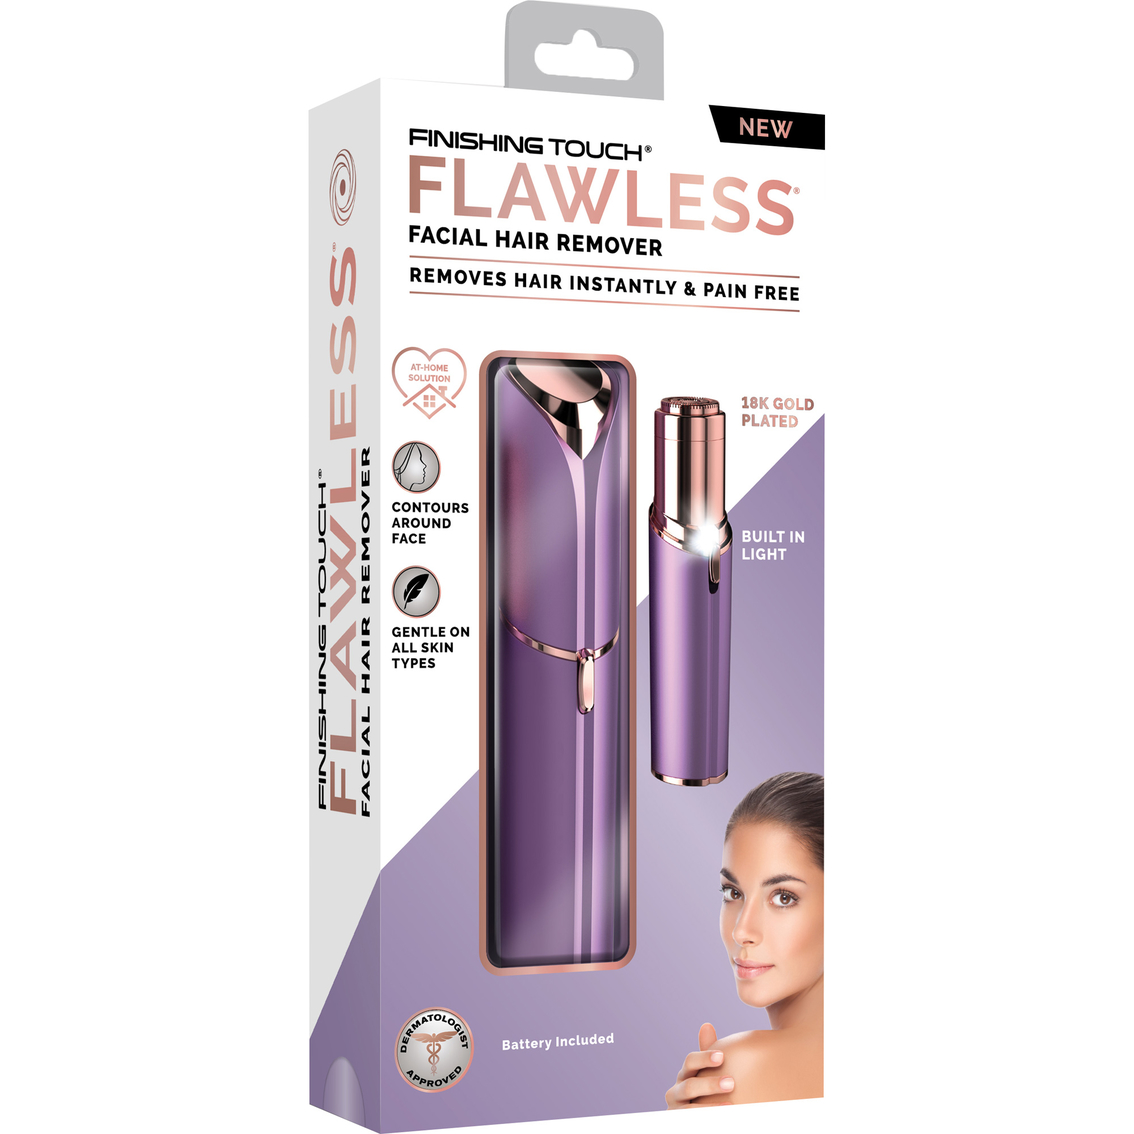 Finishing Touch Flawless Instant And Painless Facial Hair Remover, Infomercial Products, Household